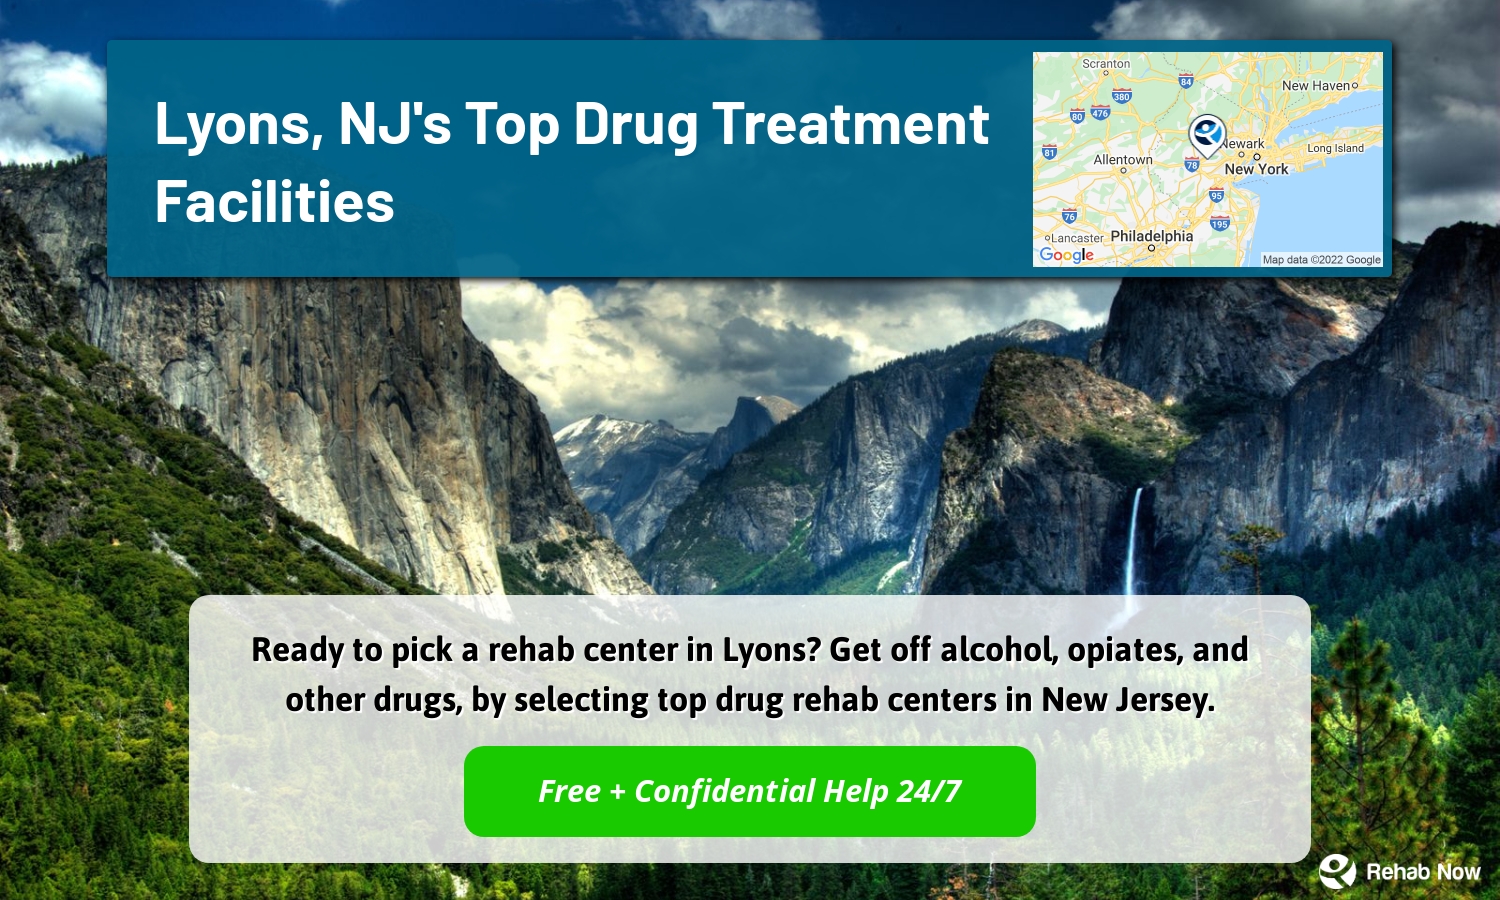 Ready to pick a rehab center in Lyons? Get off alcohol, opiates, and other drugs, by selecting top drug rehab centers in New Jersey.